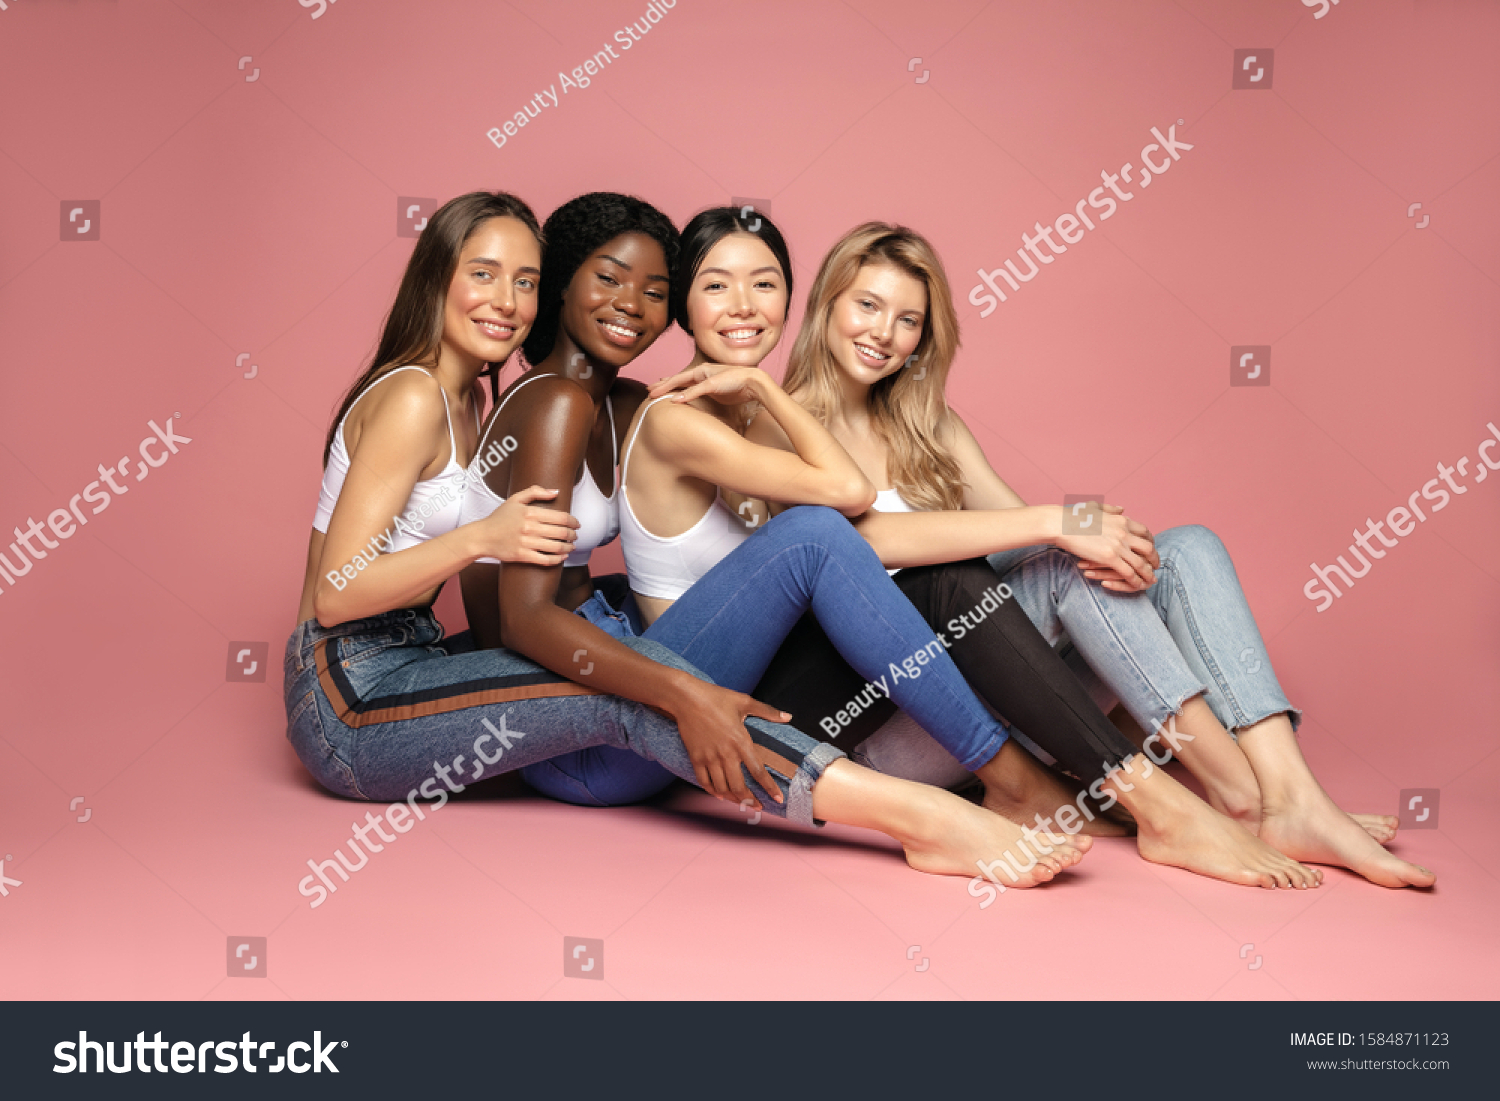 Multi Ethnic Group of Womans with diffrent types of skin sitting together and looking on camera. Diverse ethnicity women - Caucasian, African and Asian against pink background #1584871123